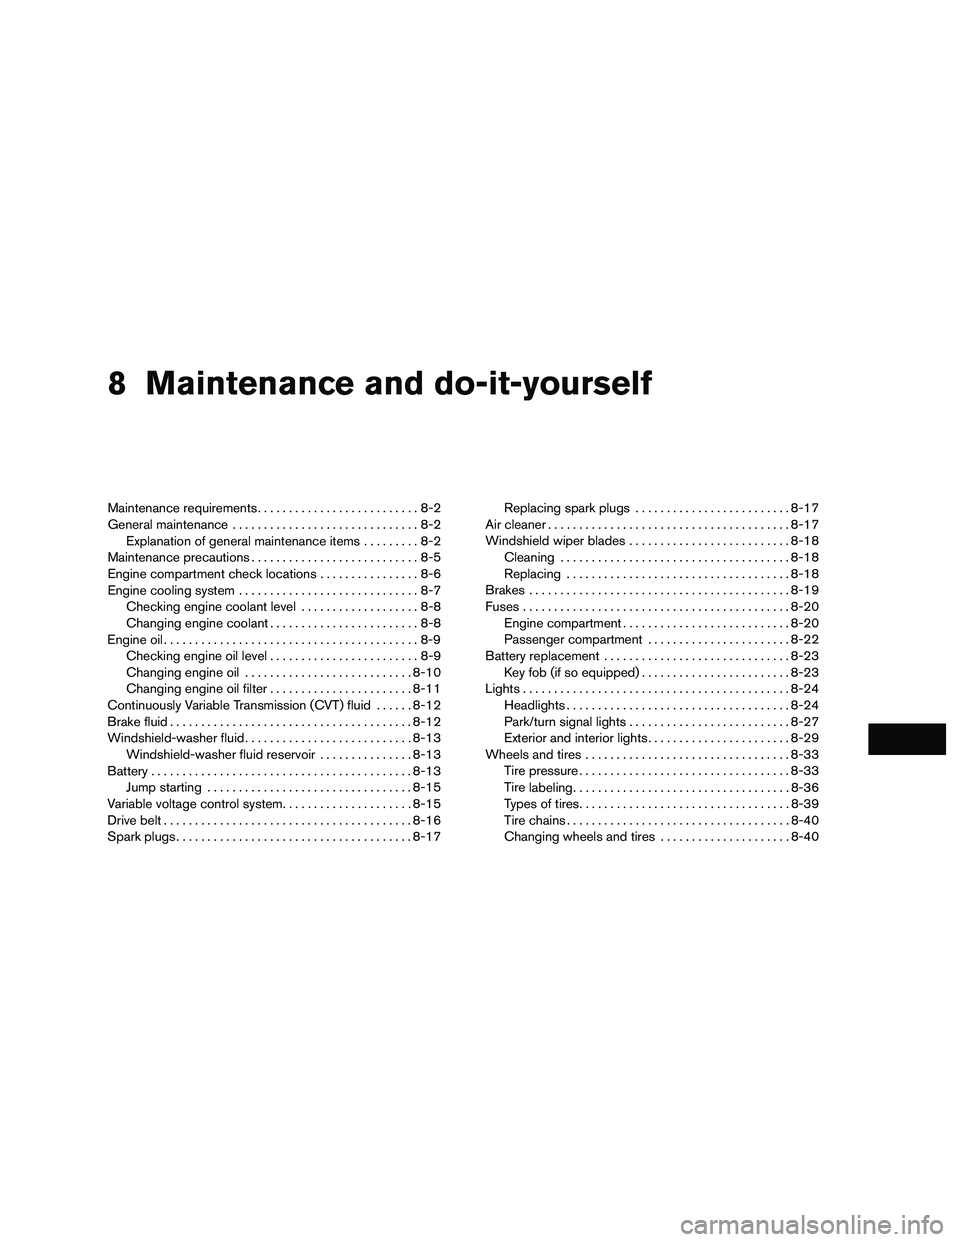 NISSAN NV200 2016  Owners Manual 8 Maintenance and do-it-yourself
Maintenance requirements..........................8-2
General maintenance ..............................8-2
Explanation of general maintenance items .........8-2
Maint